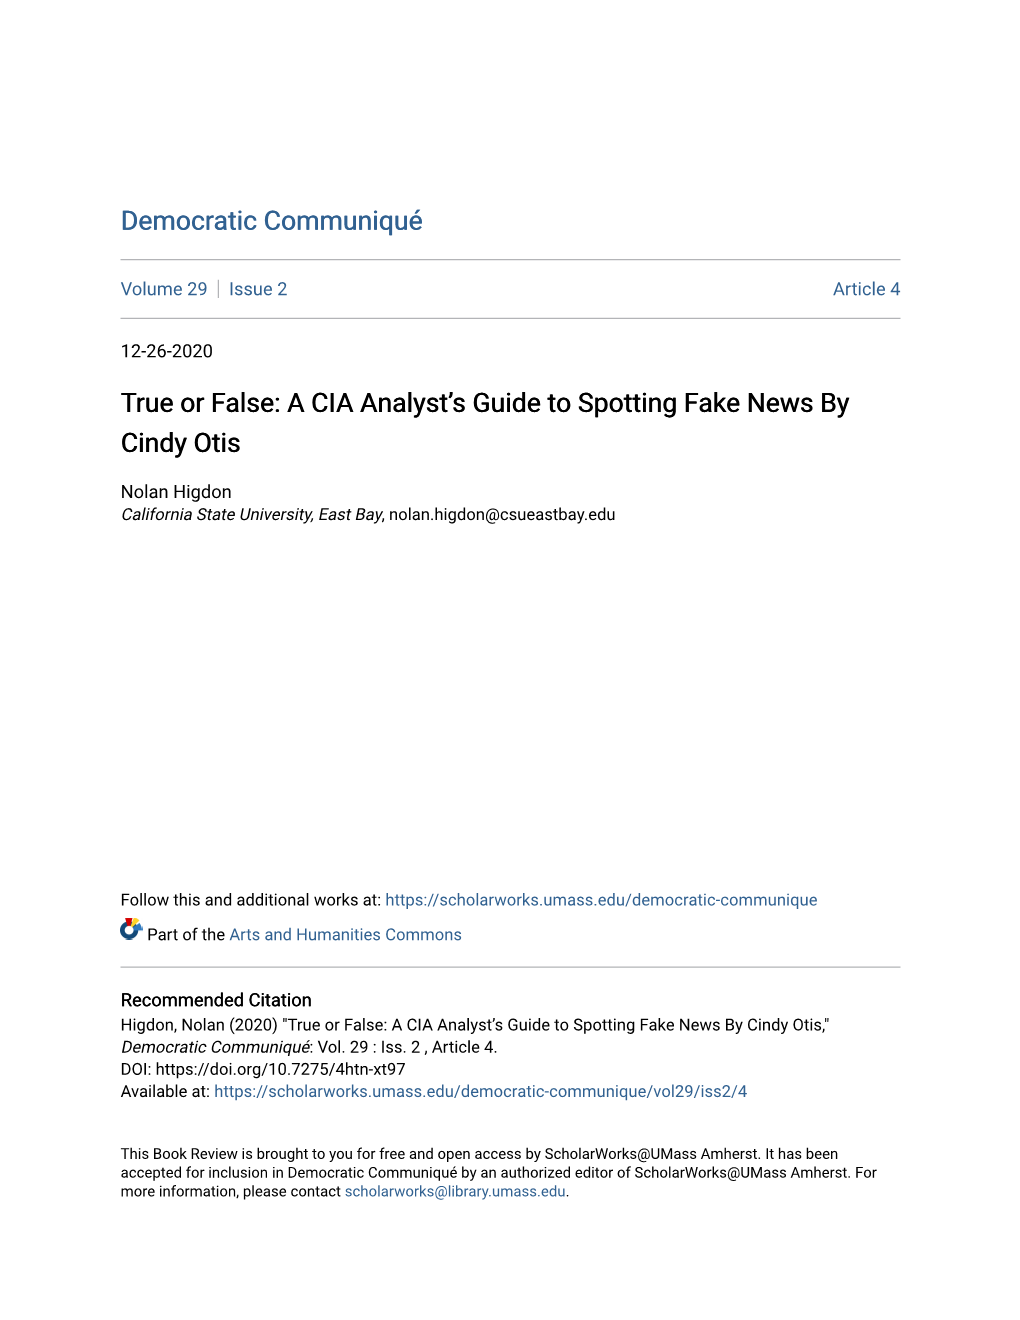 A CIA Analyst's Guide to Spotting Fake News by Cindy Otis